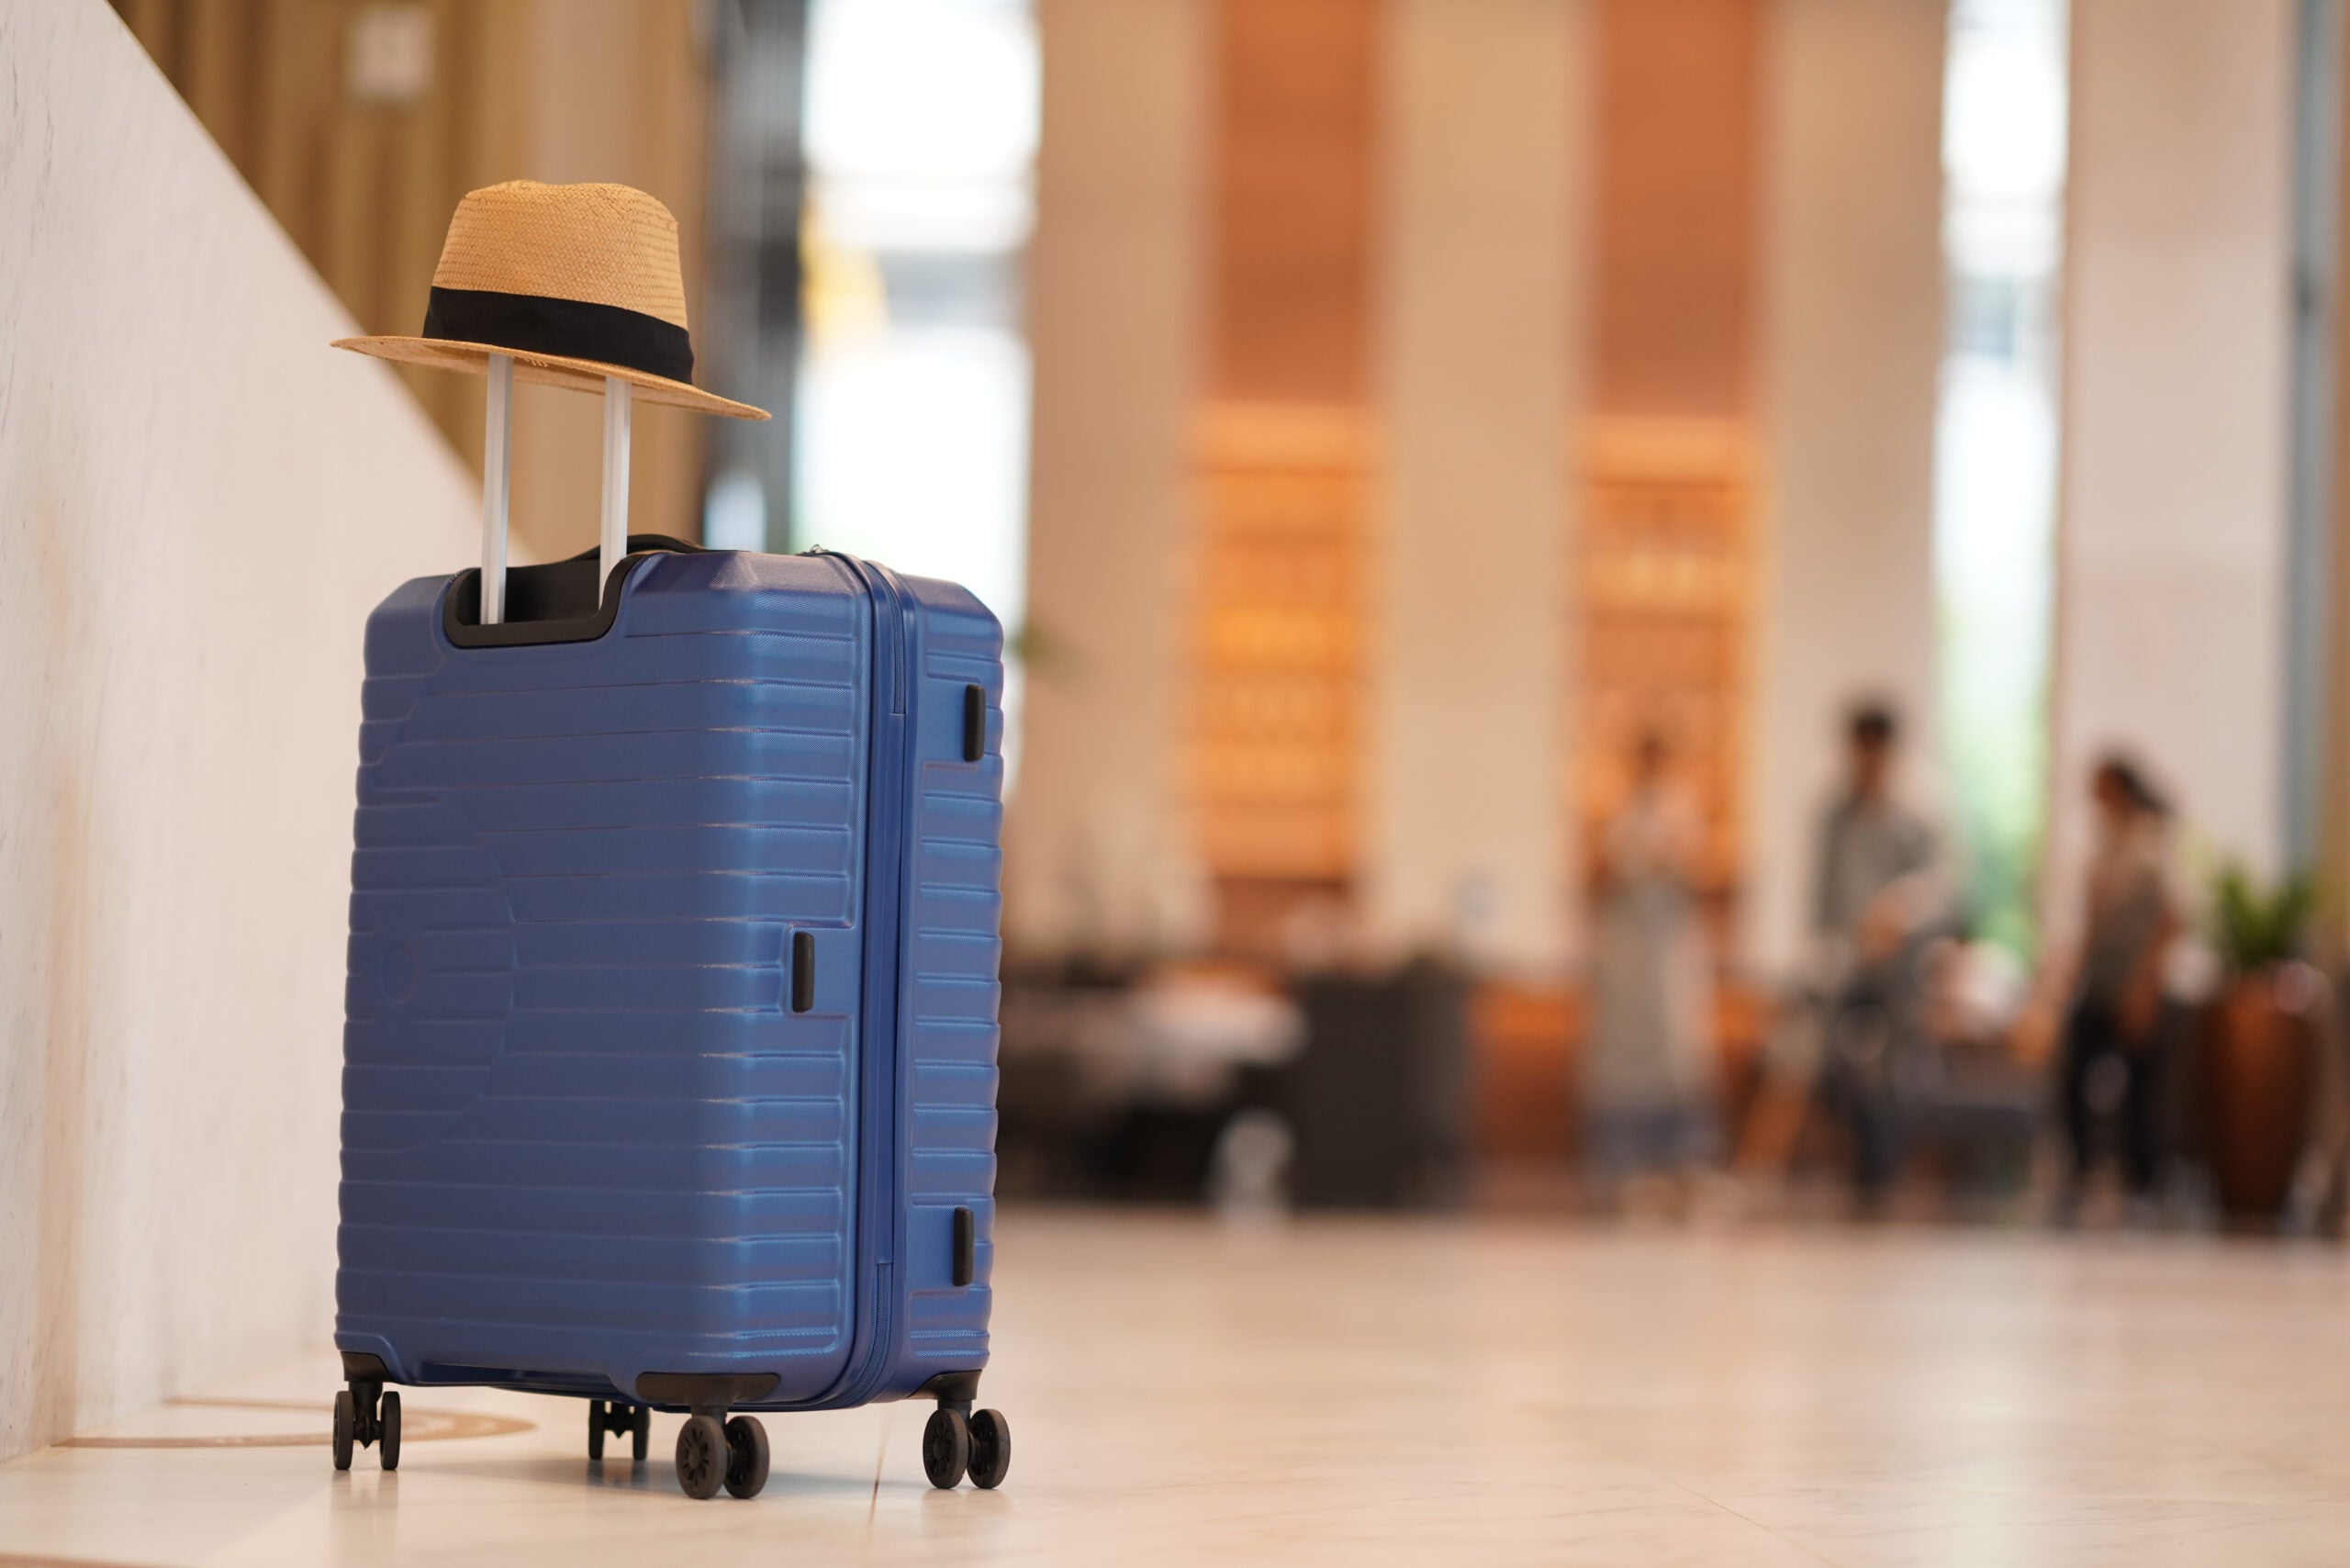 Luggage with sun hat in hotel lobby